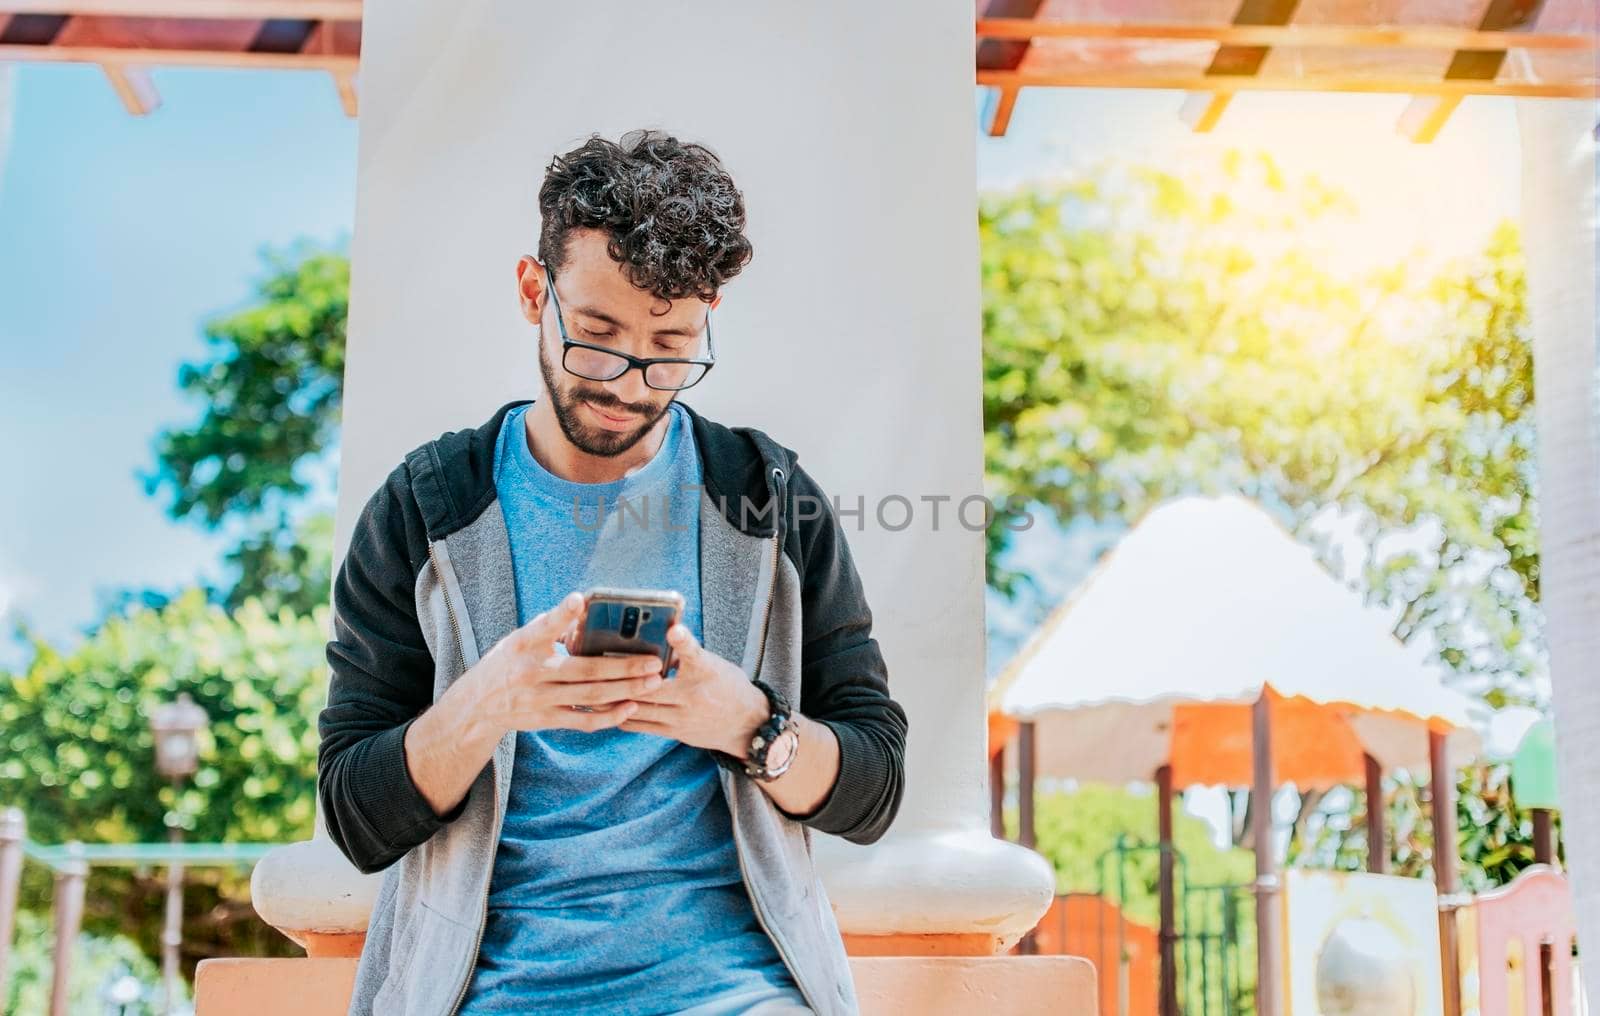 Handsome guy in glasses leaning on a wall chatting on his cell phone, Teenage male leaning on a wall sending a text message, Smiling handsome man using a phone leaning on a wall in a park by isaiphoto